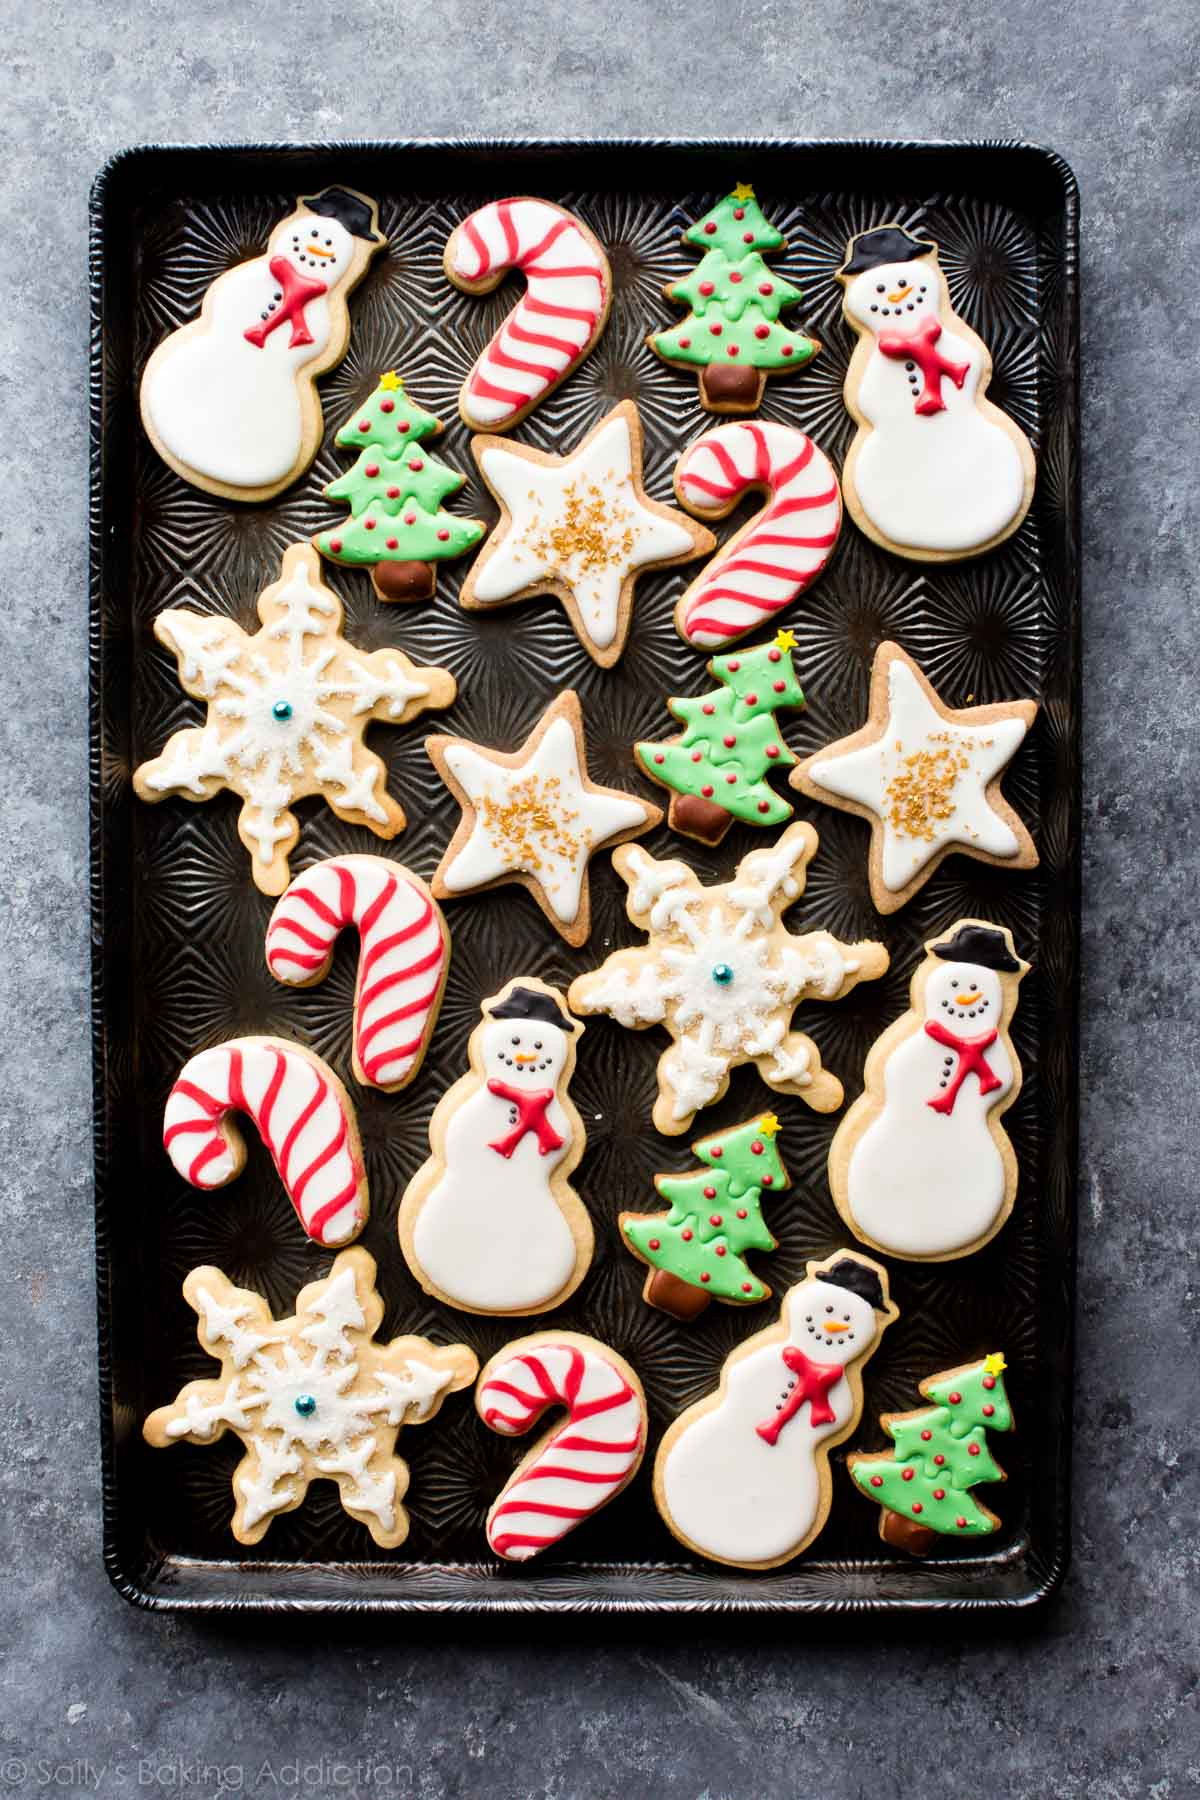 Iced Christmas Cookies
 How to Decorate Sugar Cookies